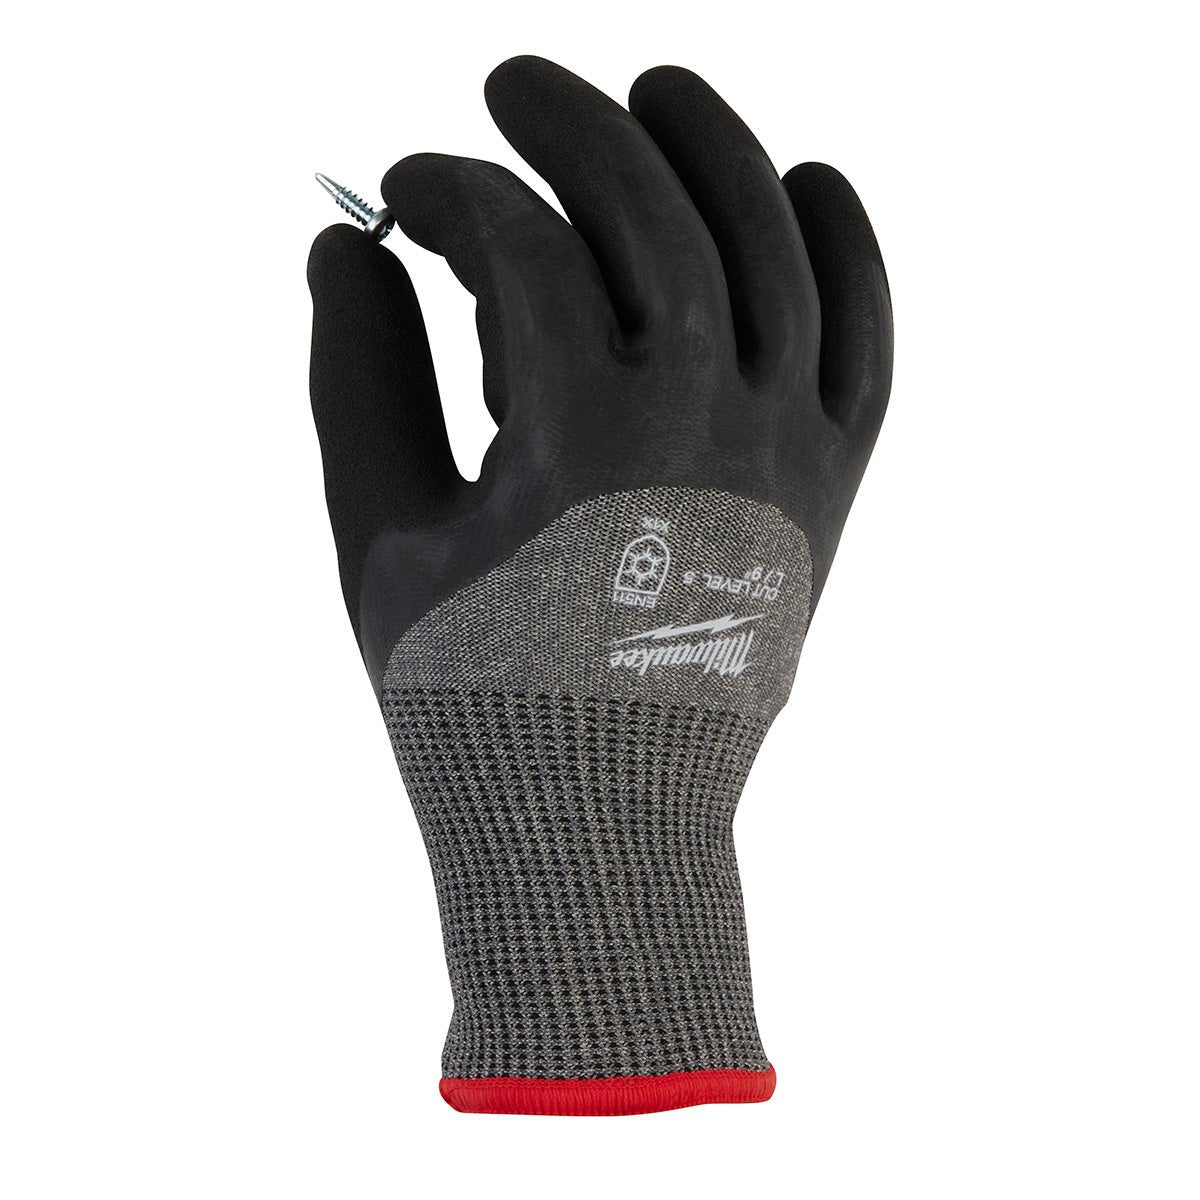 Milwaukee Cut Level 5 Winter Dipped Gloves